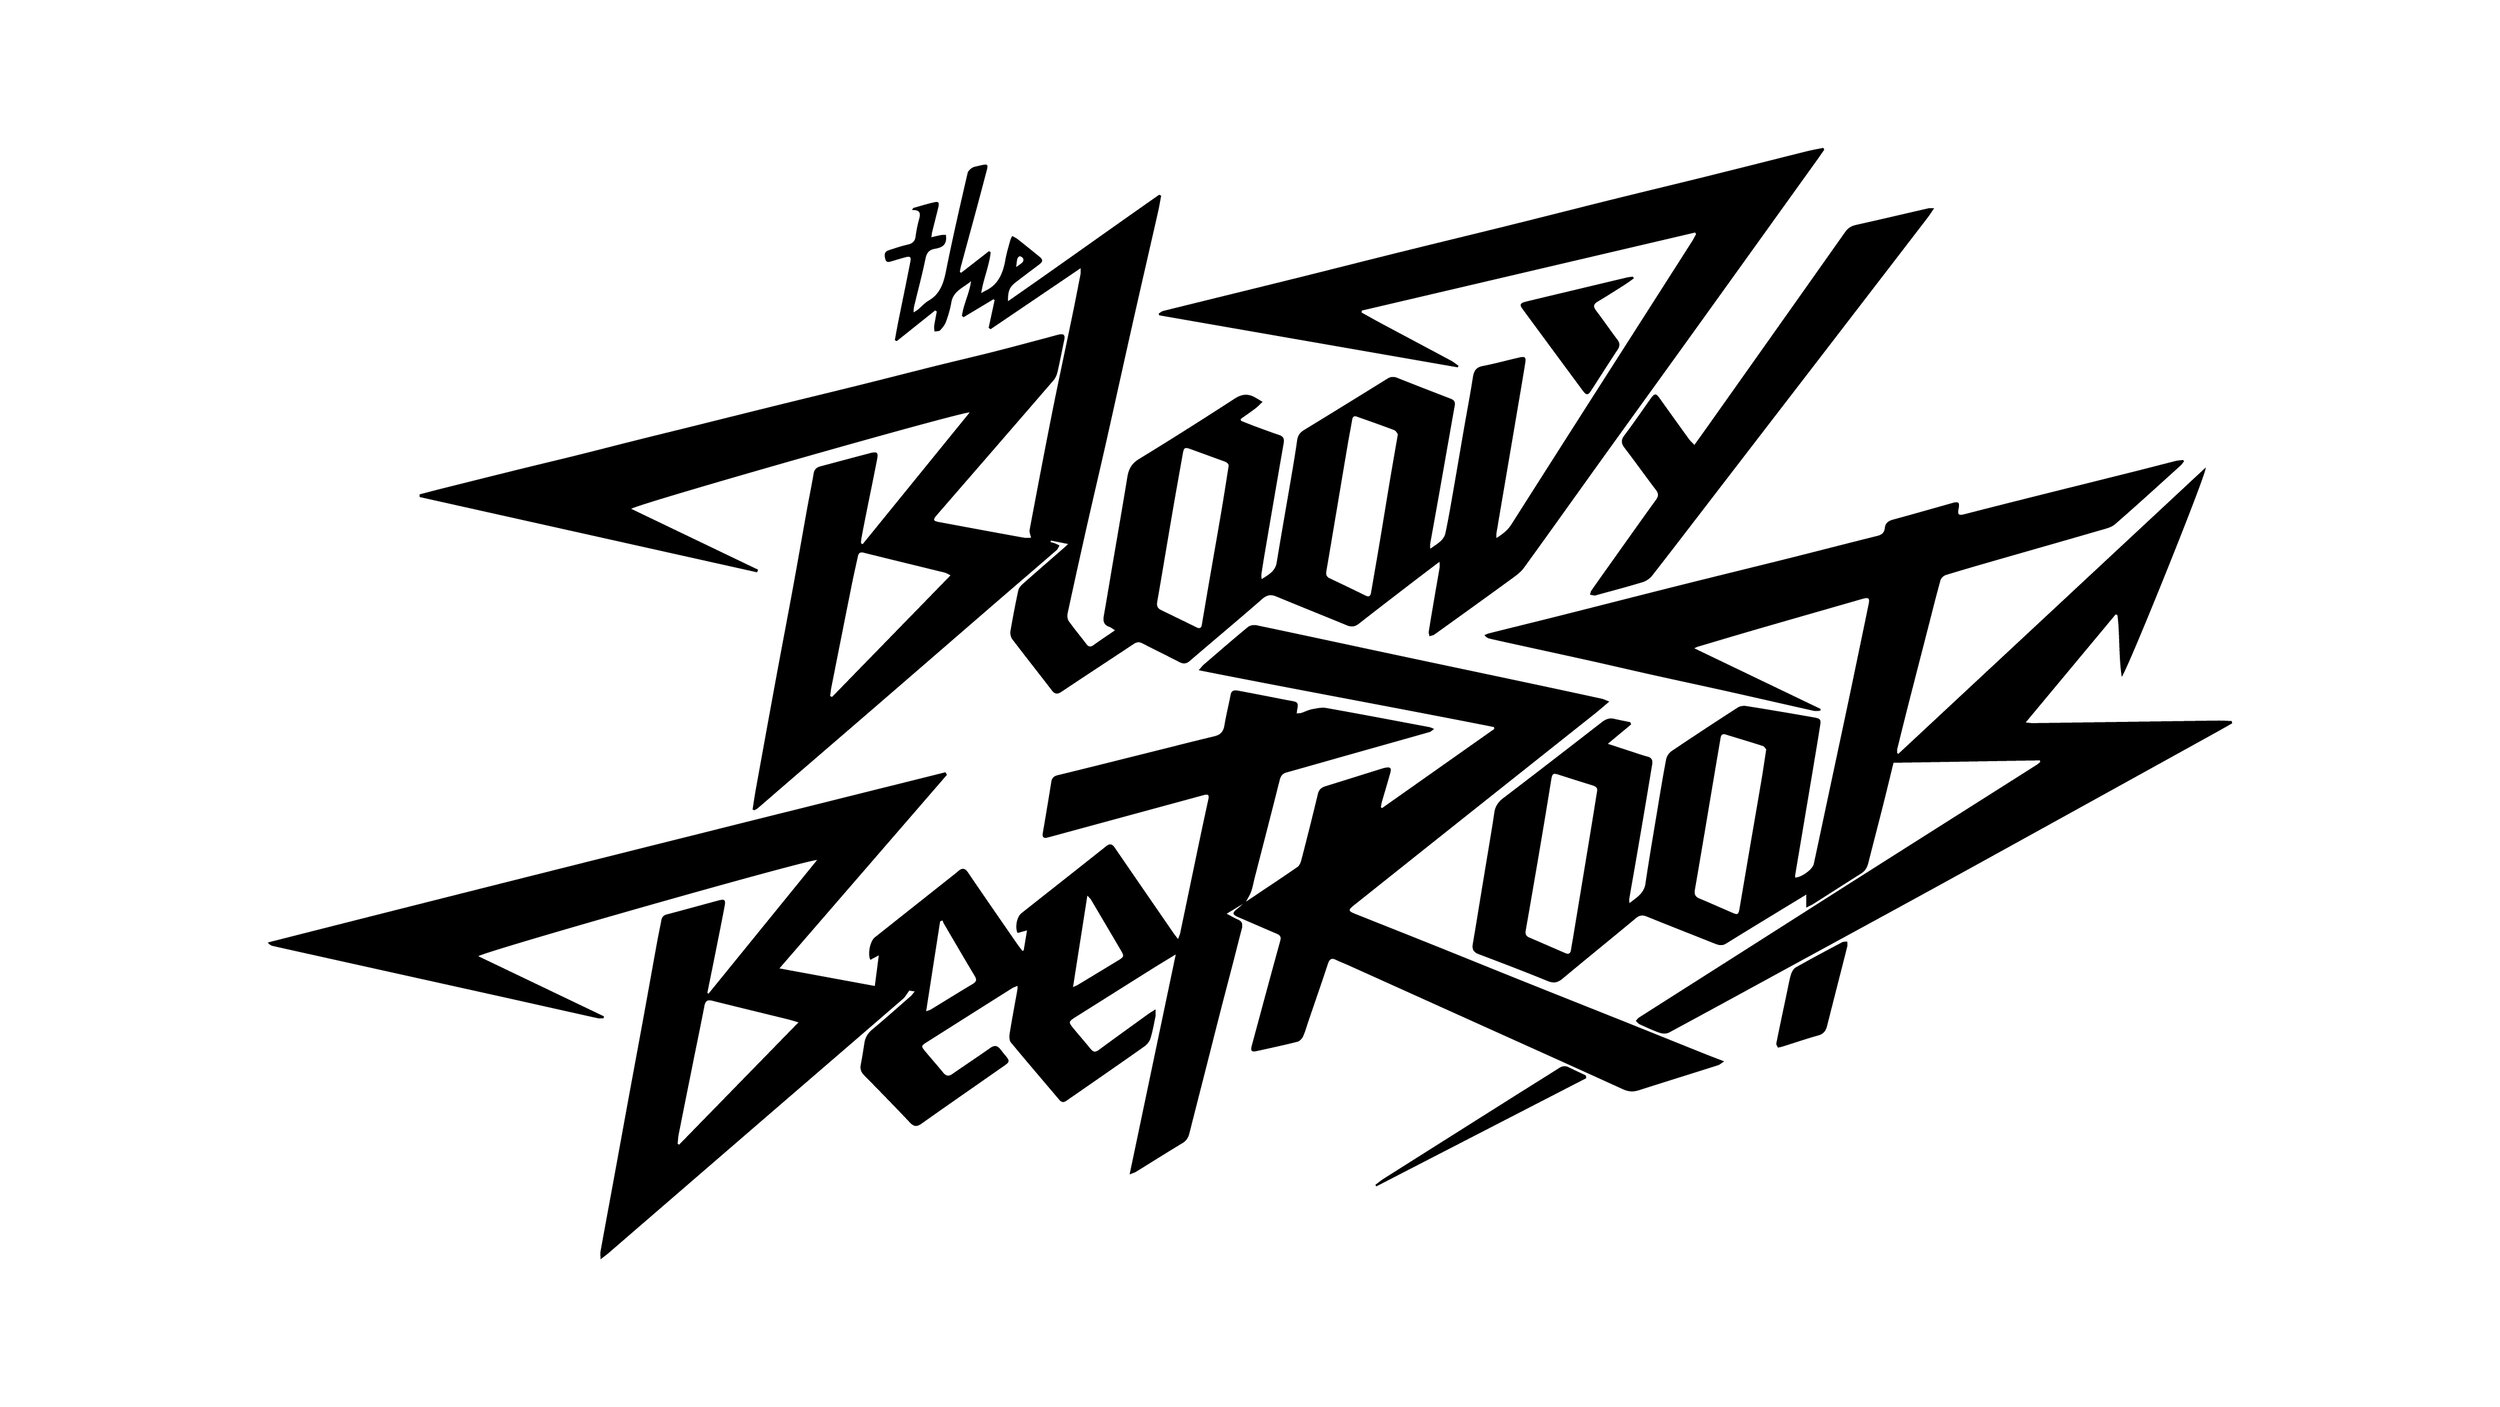 Logo_The_Bloody_Beetroots.jpg